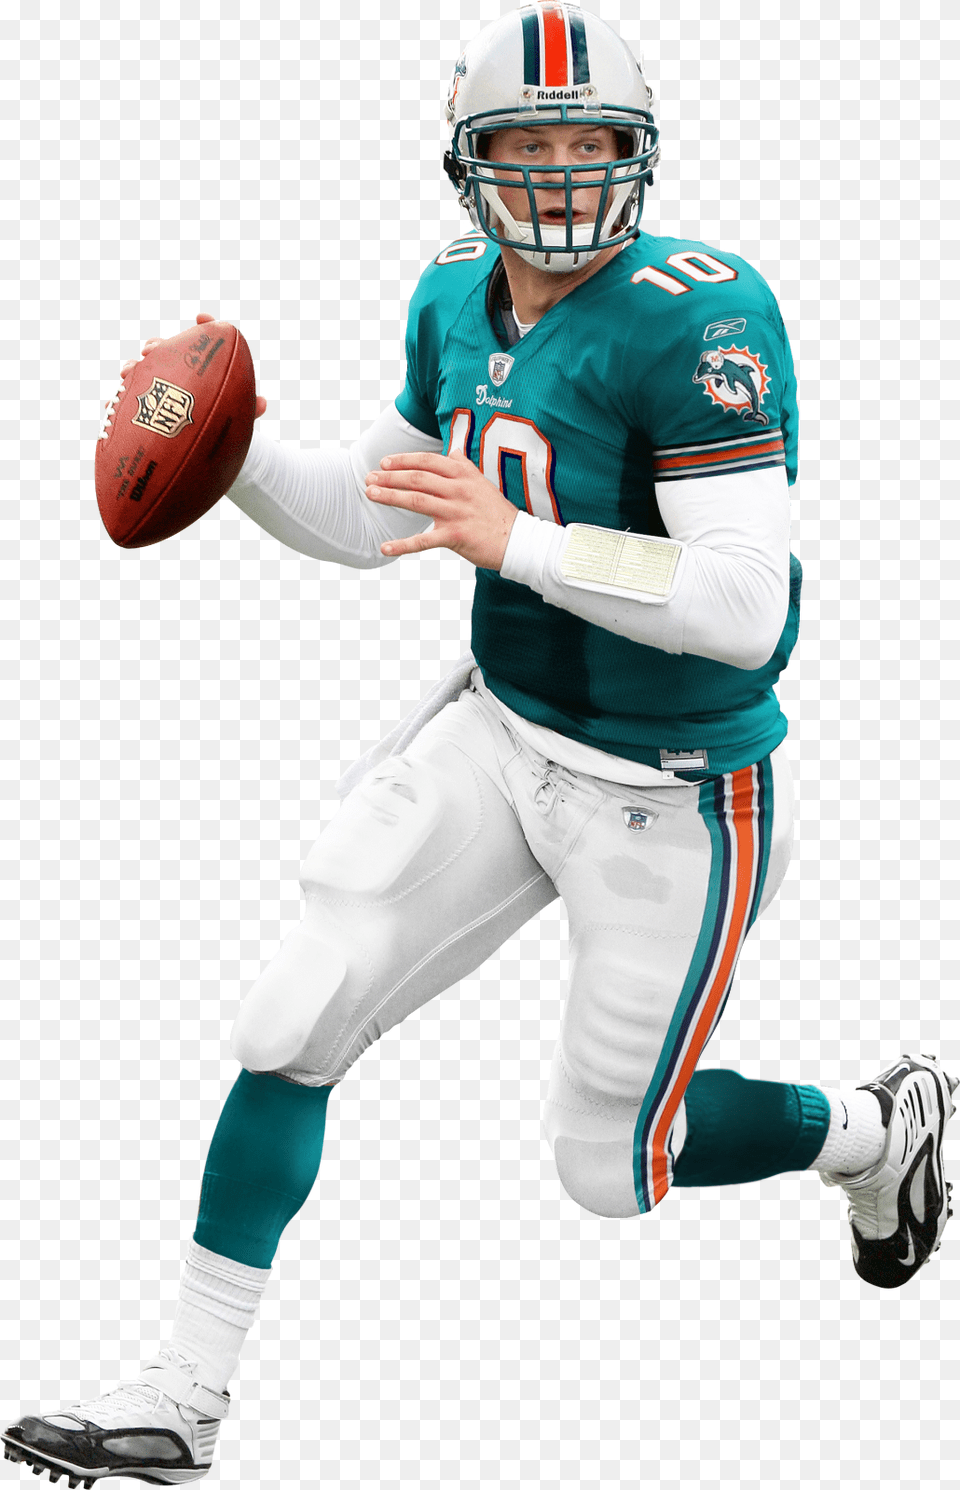 Miami Dolphins Player Dolphins Nfl Player, Helmet, Playing American Football, Person, Sport Png